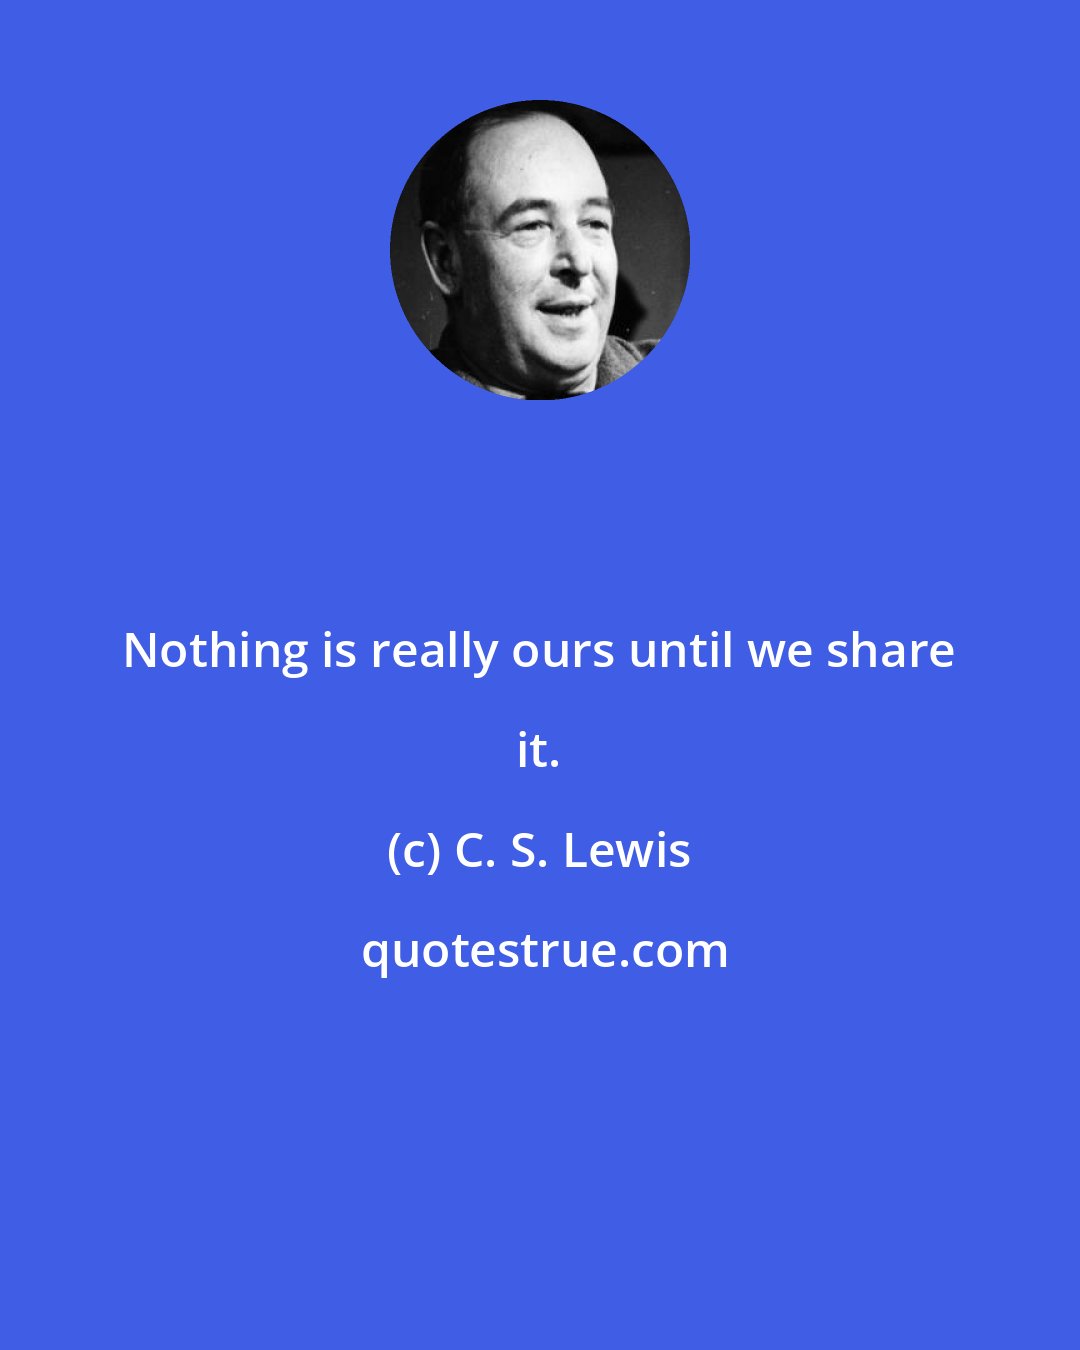 C. S. Lewis: Nothing is really ours until we share it.